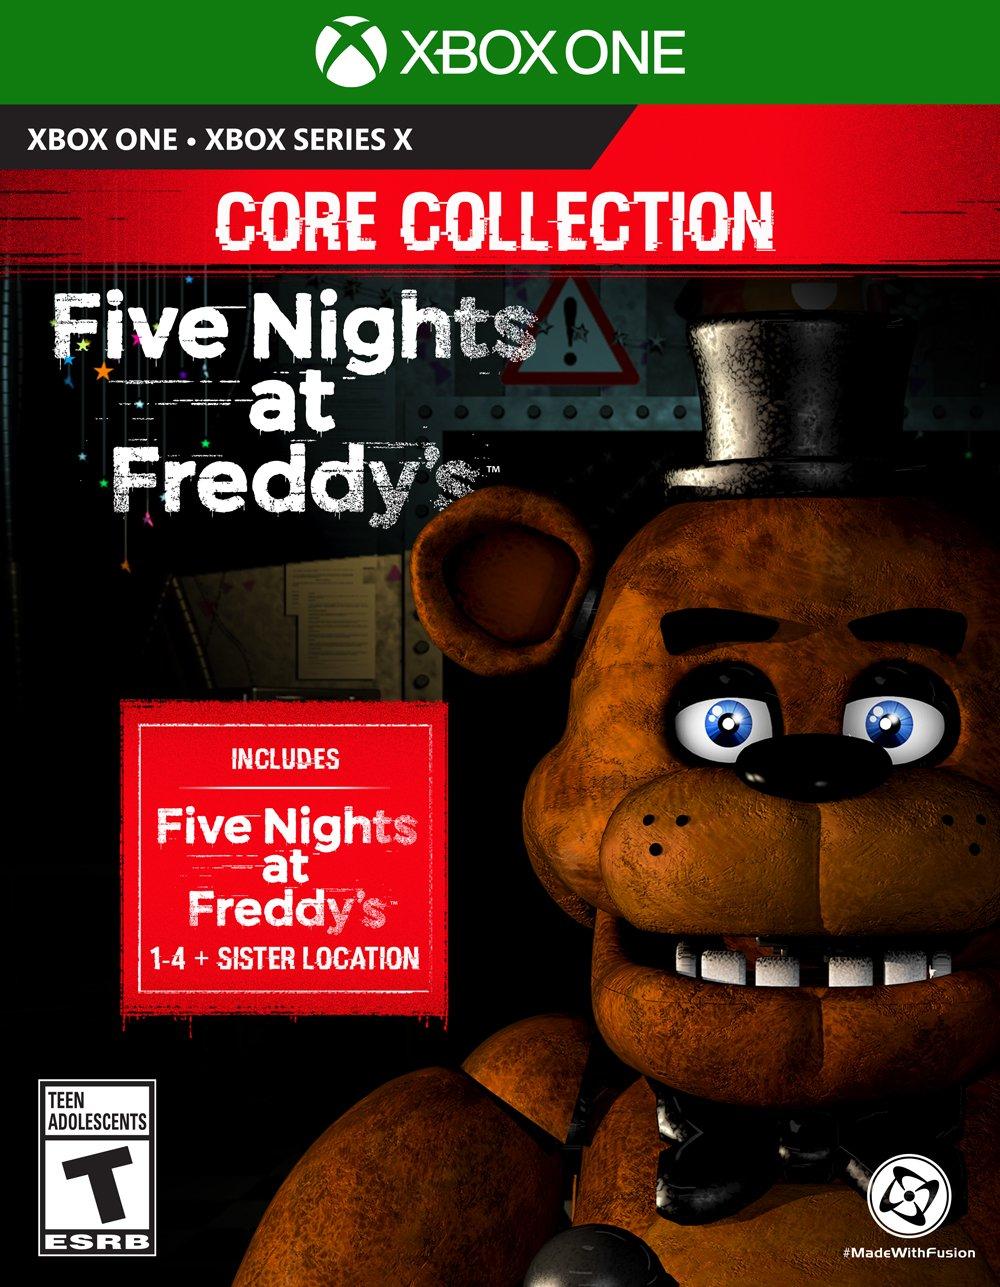 Five Nights at Freddy's: Core Collection - Xbox One, Xbox One